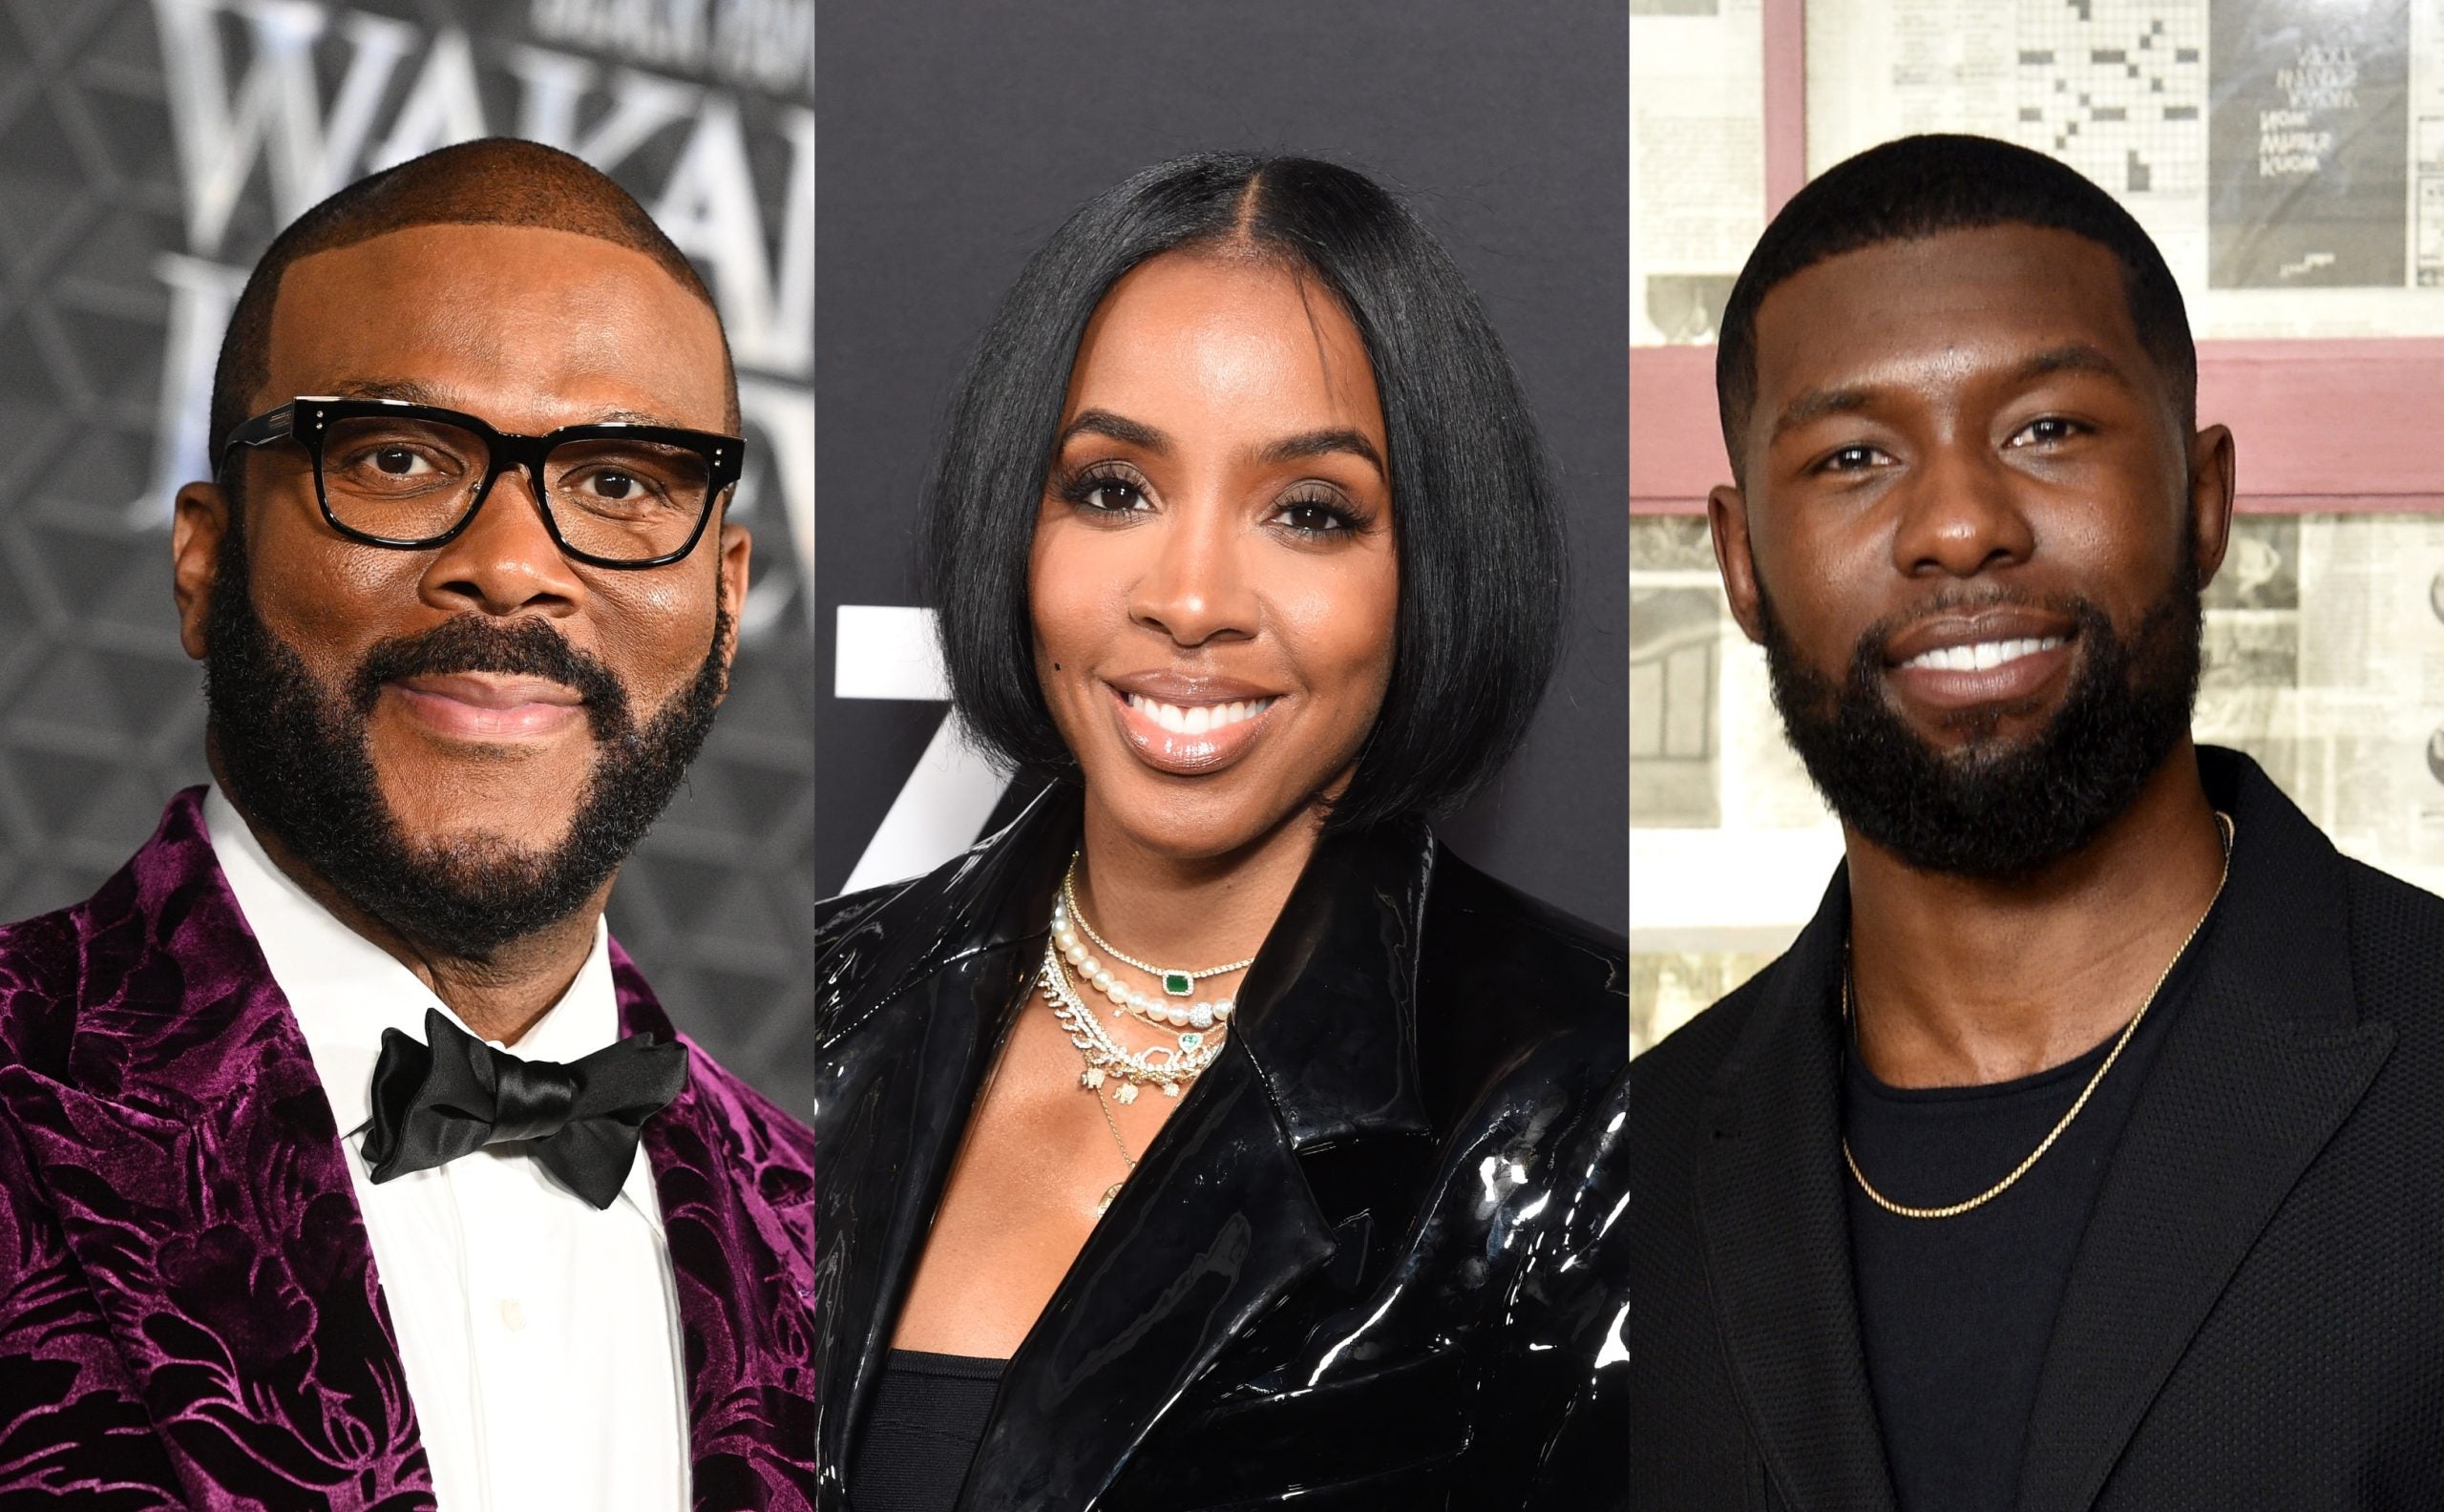 Kelly Rowland And Trevante Rhodes To Star In Tyler Perry Netflix Film ‘Mea Culpa’